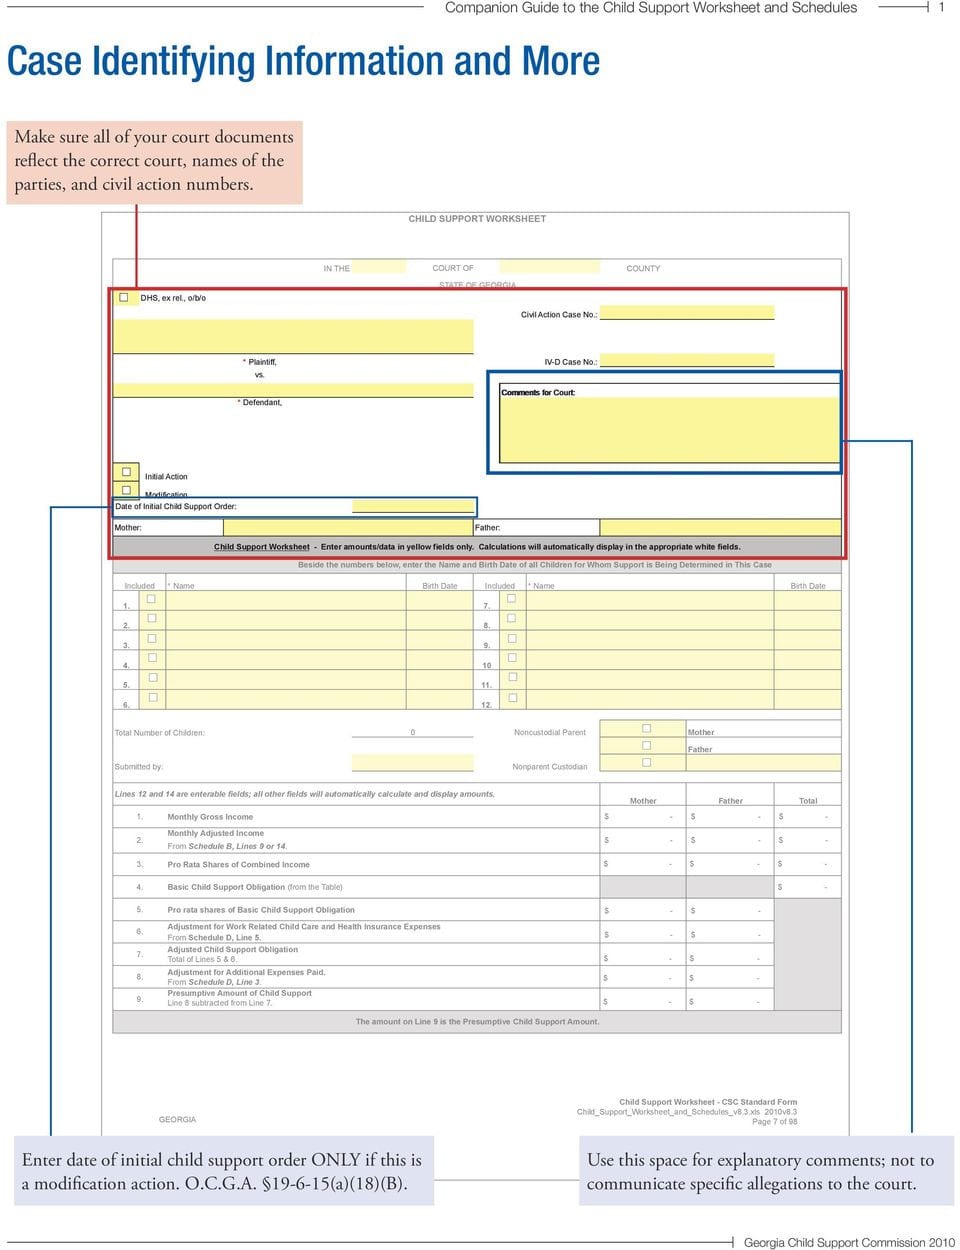 Companion Guide To Child Support Worksheet And Schedules  Pdf